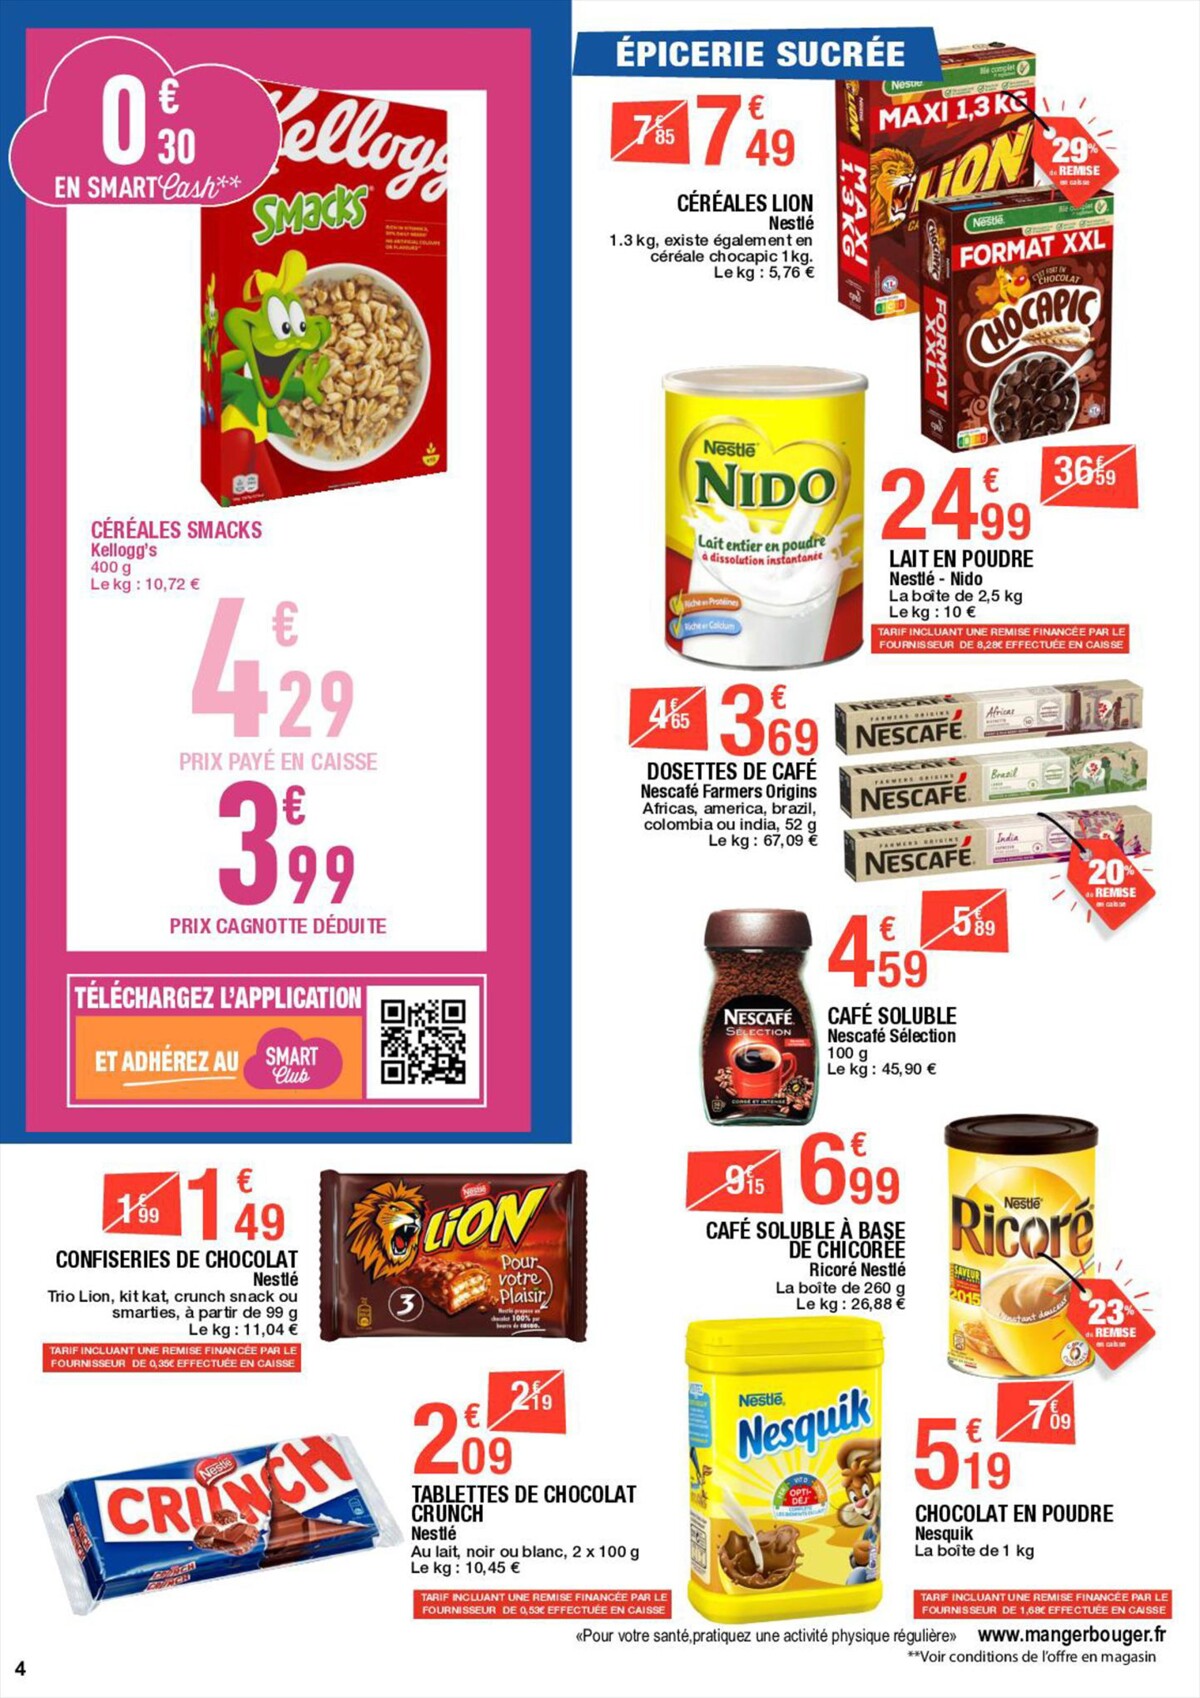 Catalogue Carrefour Special MDD, page 00004